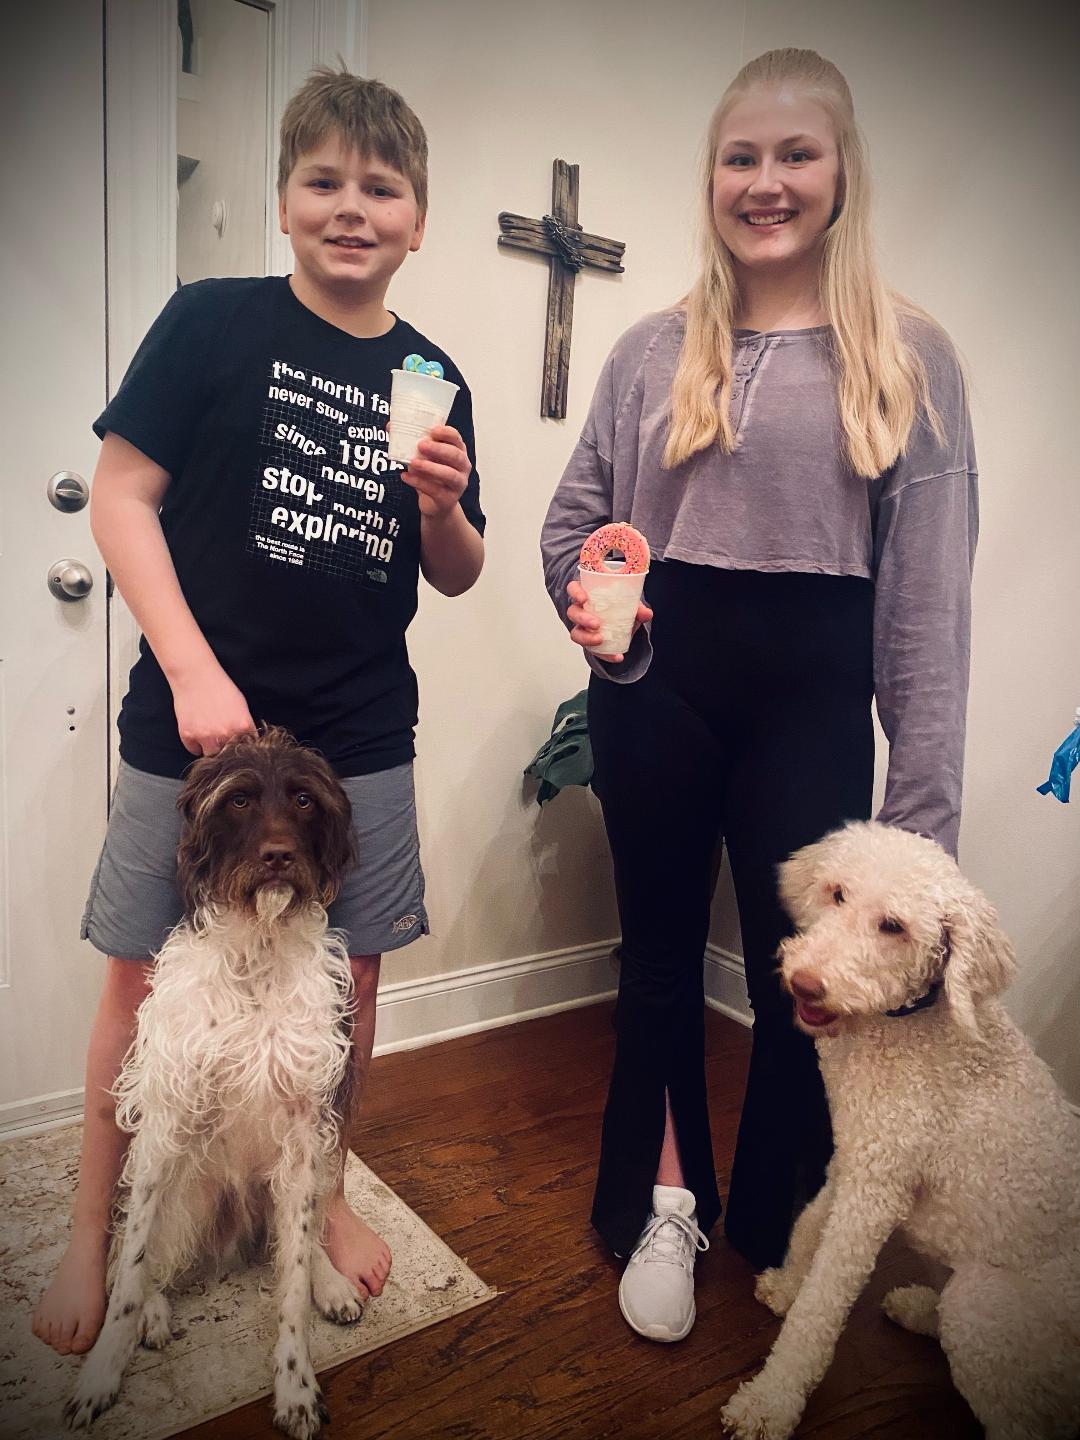 Brother and sister holding dog treats with two dogs next to them